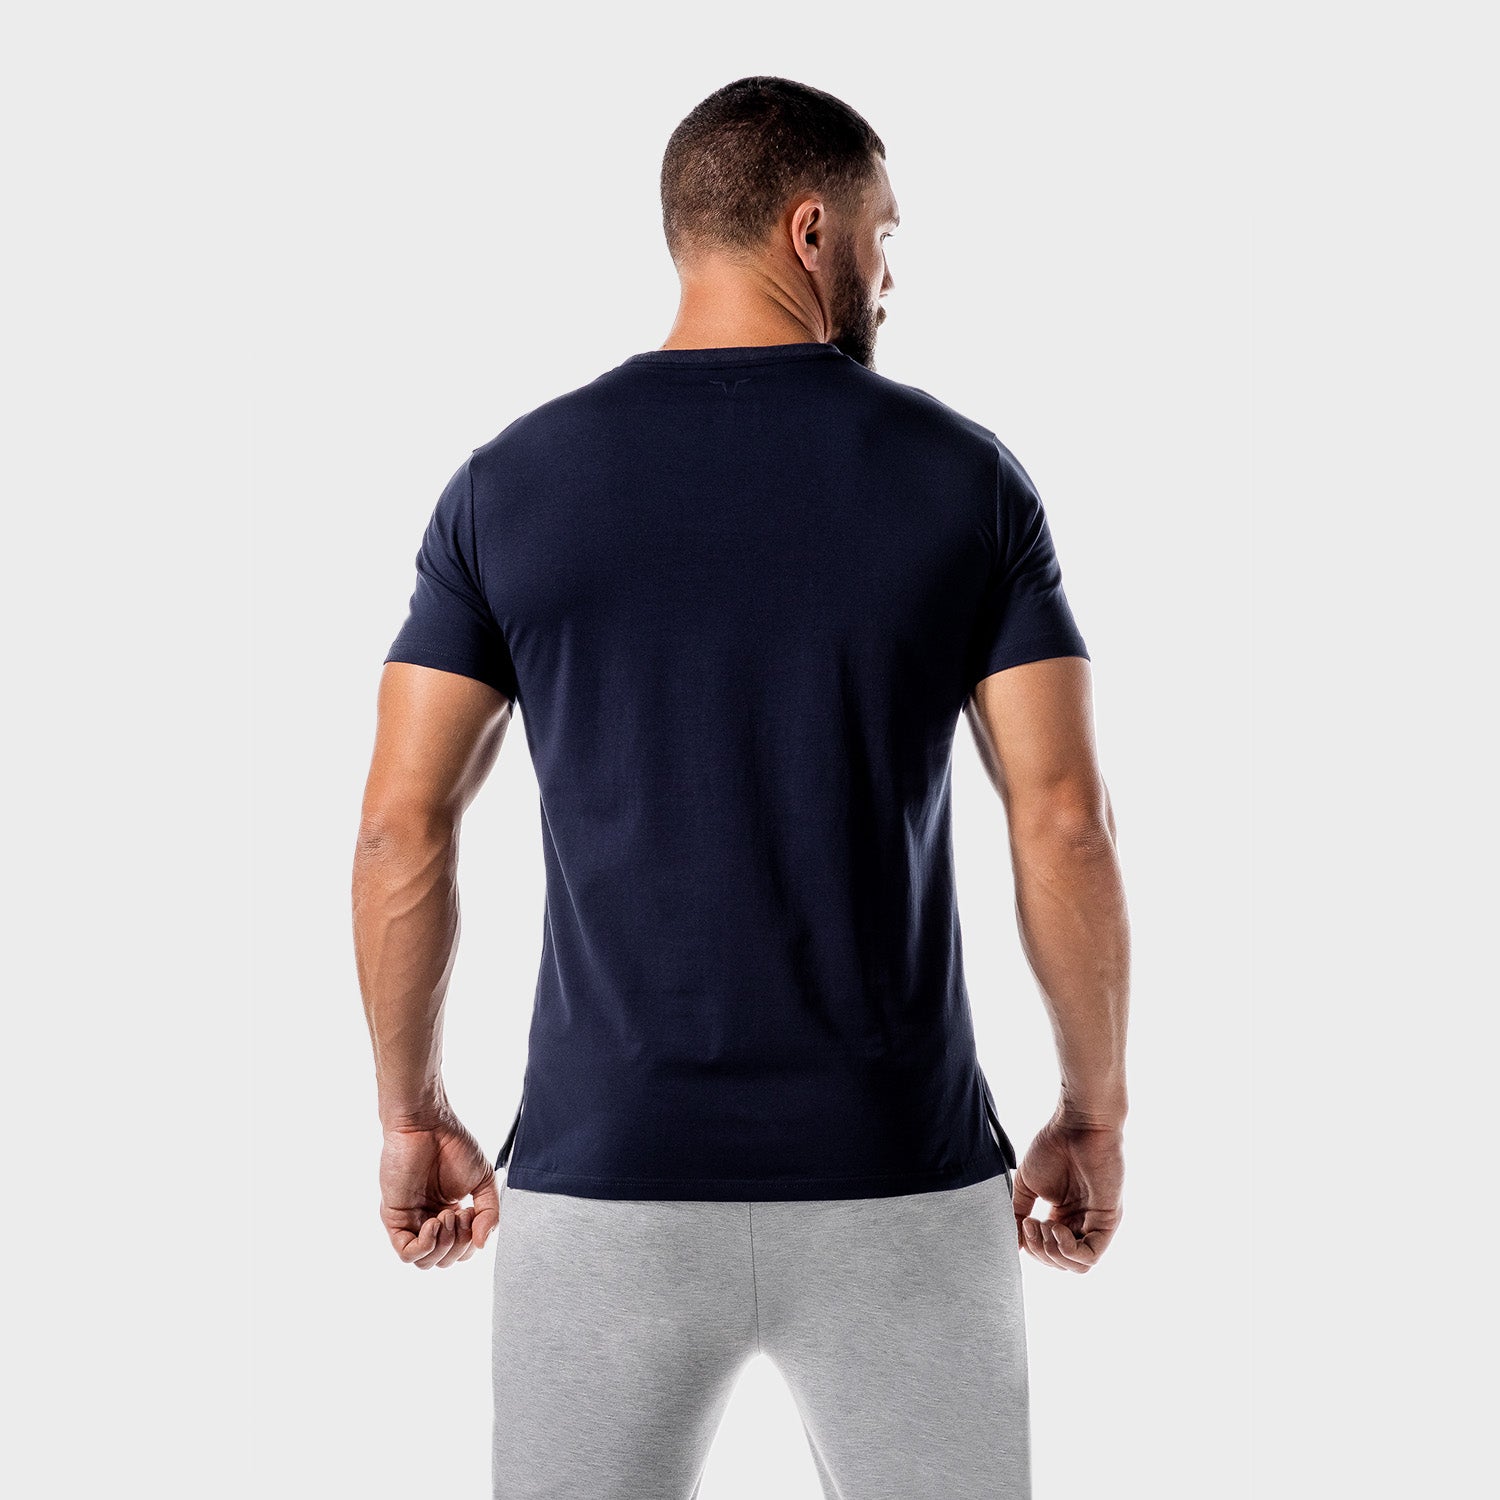 squatwolf-gym-wear-iconic-muscle-tee-blue-workout-shirts-for-men